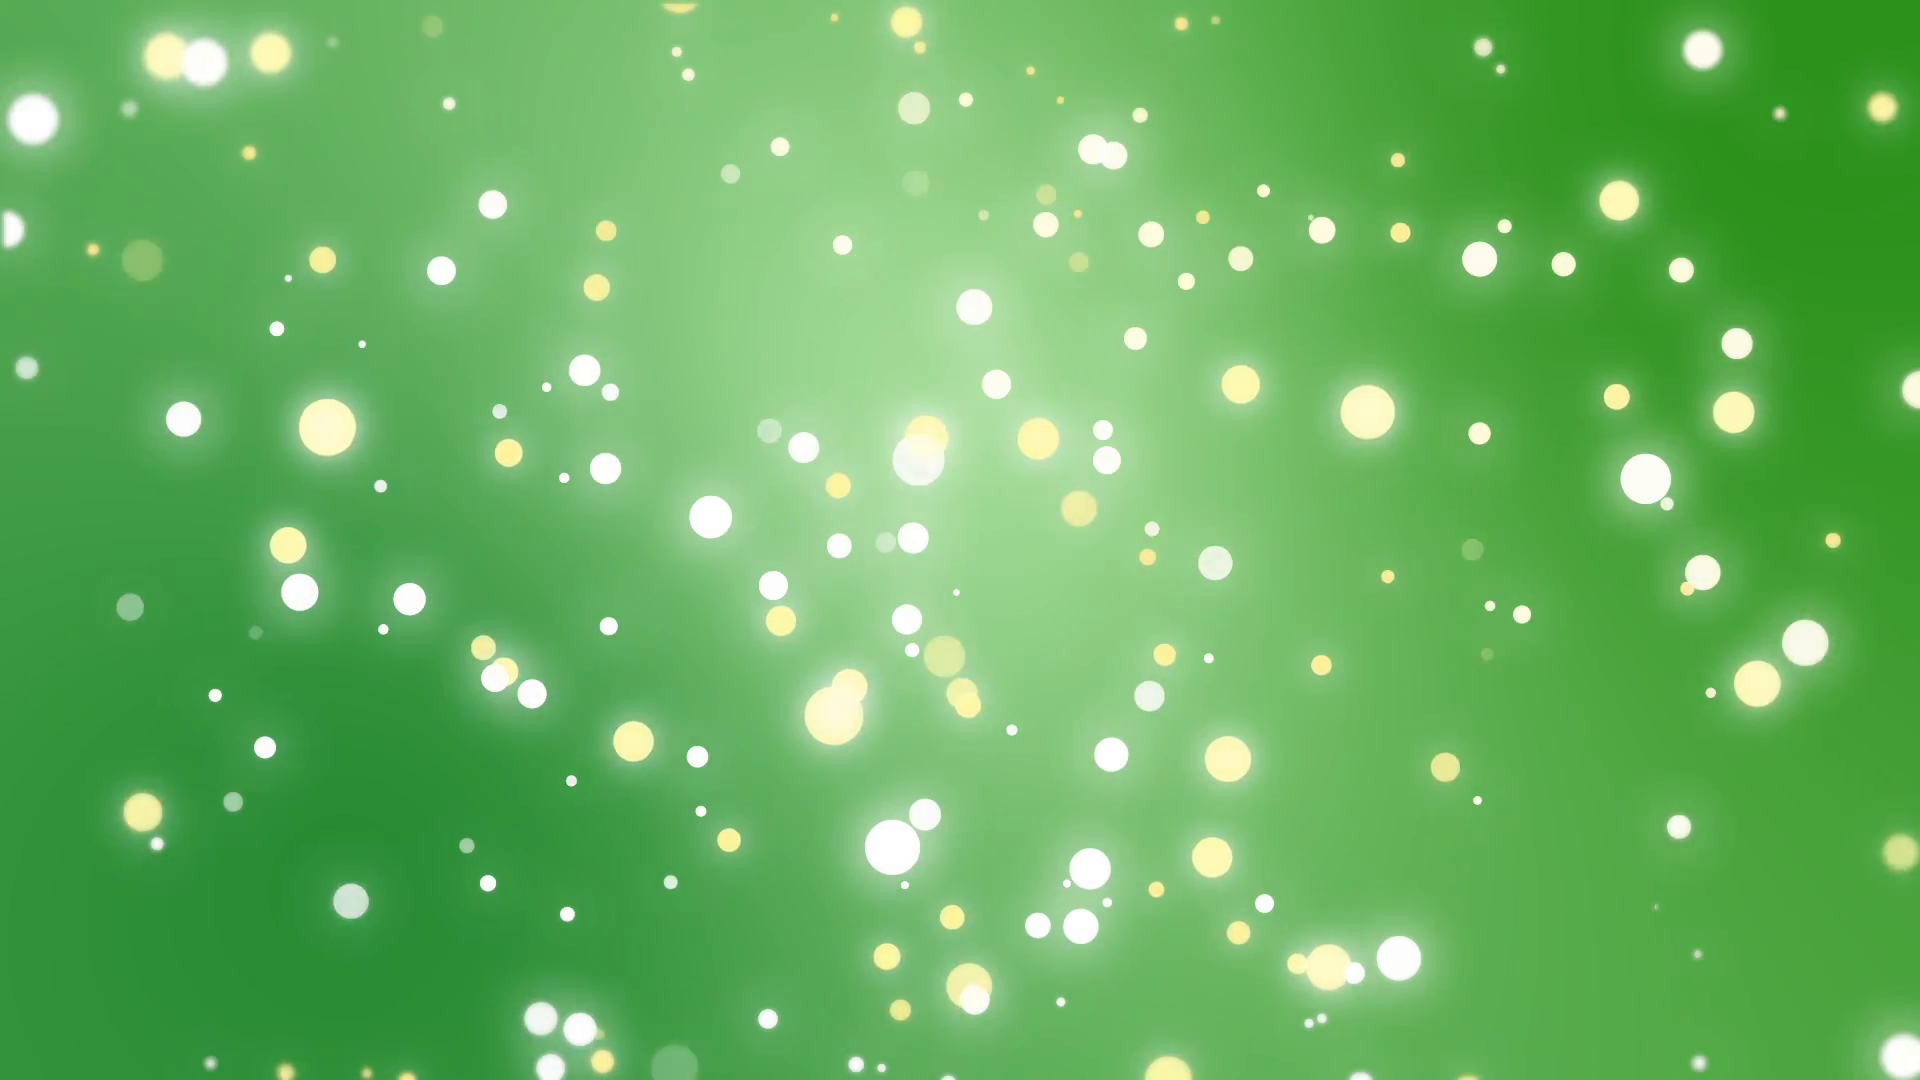 Sparkly gold and silver light particles moving across a green ...